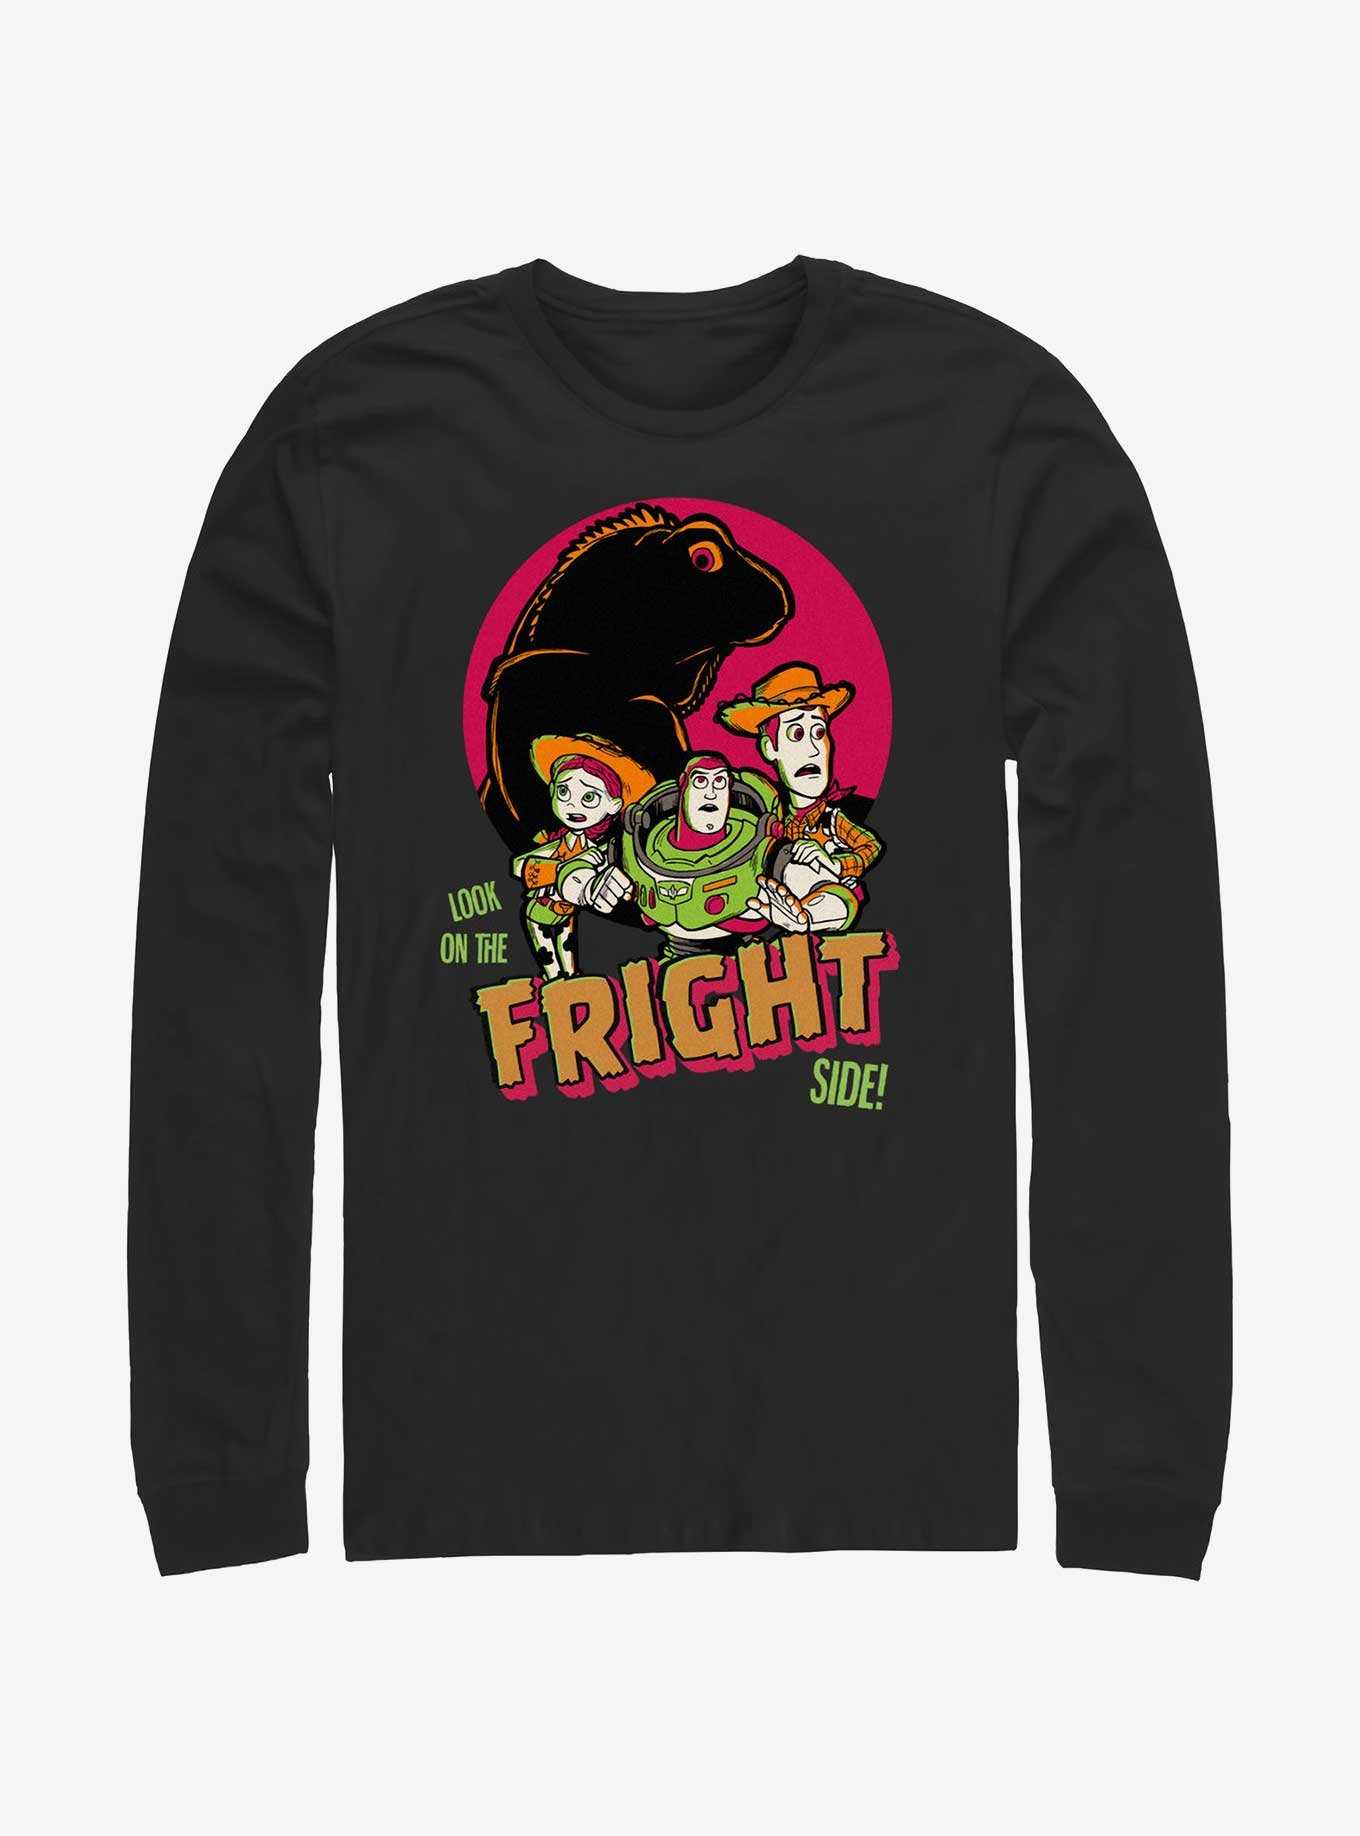 Disney100 Halloween Toy Story Jessie, Buzz & Woody Look On The Fright Side Long-Sleeve T-Shirt, , hi-res